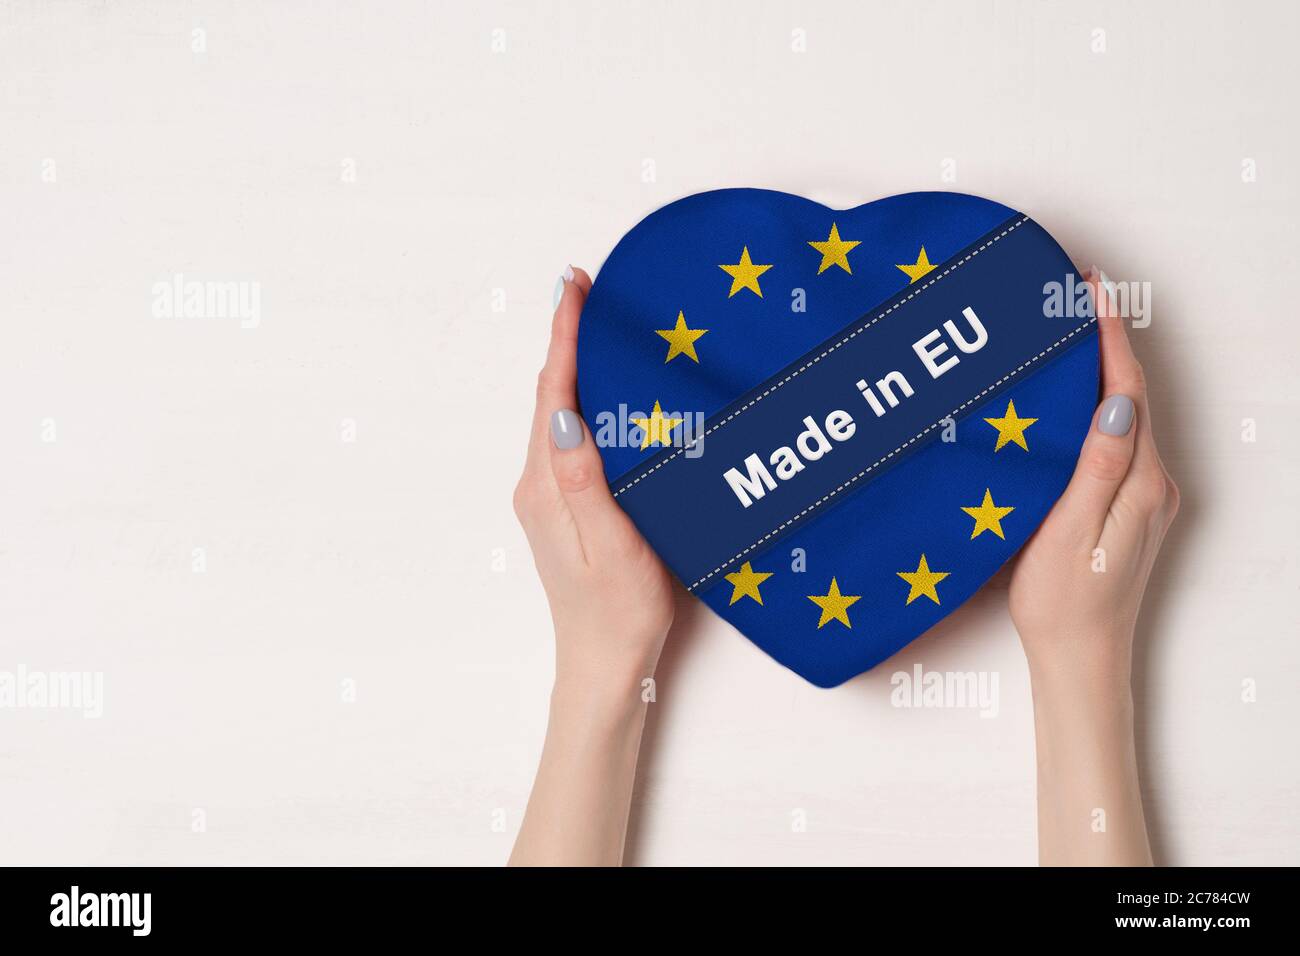 Inscription Made in EU, the flag of EU. Female hands holding a heart shaped box. White background. Place for text Stock Photo